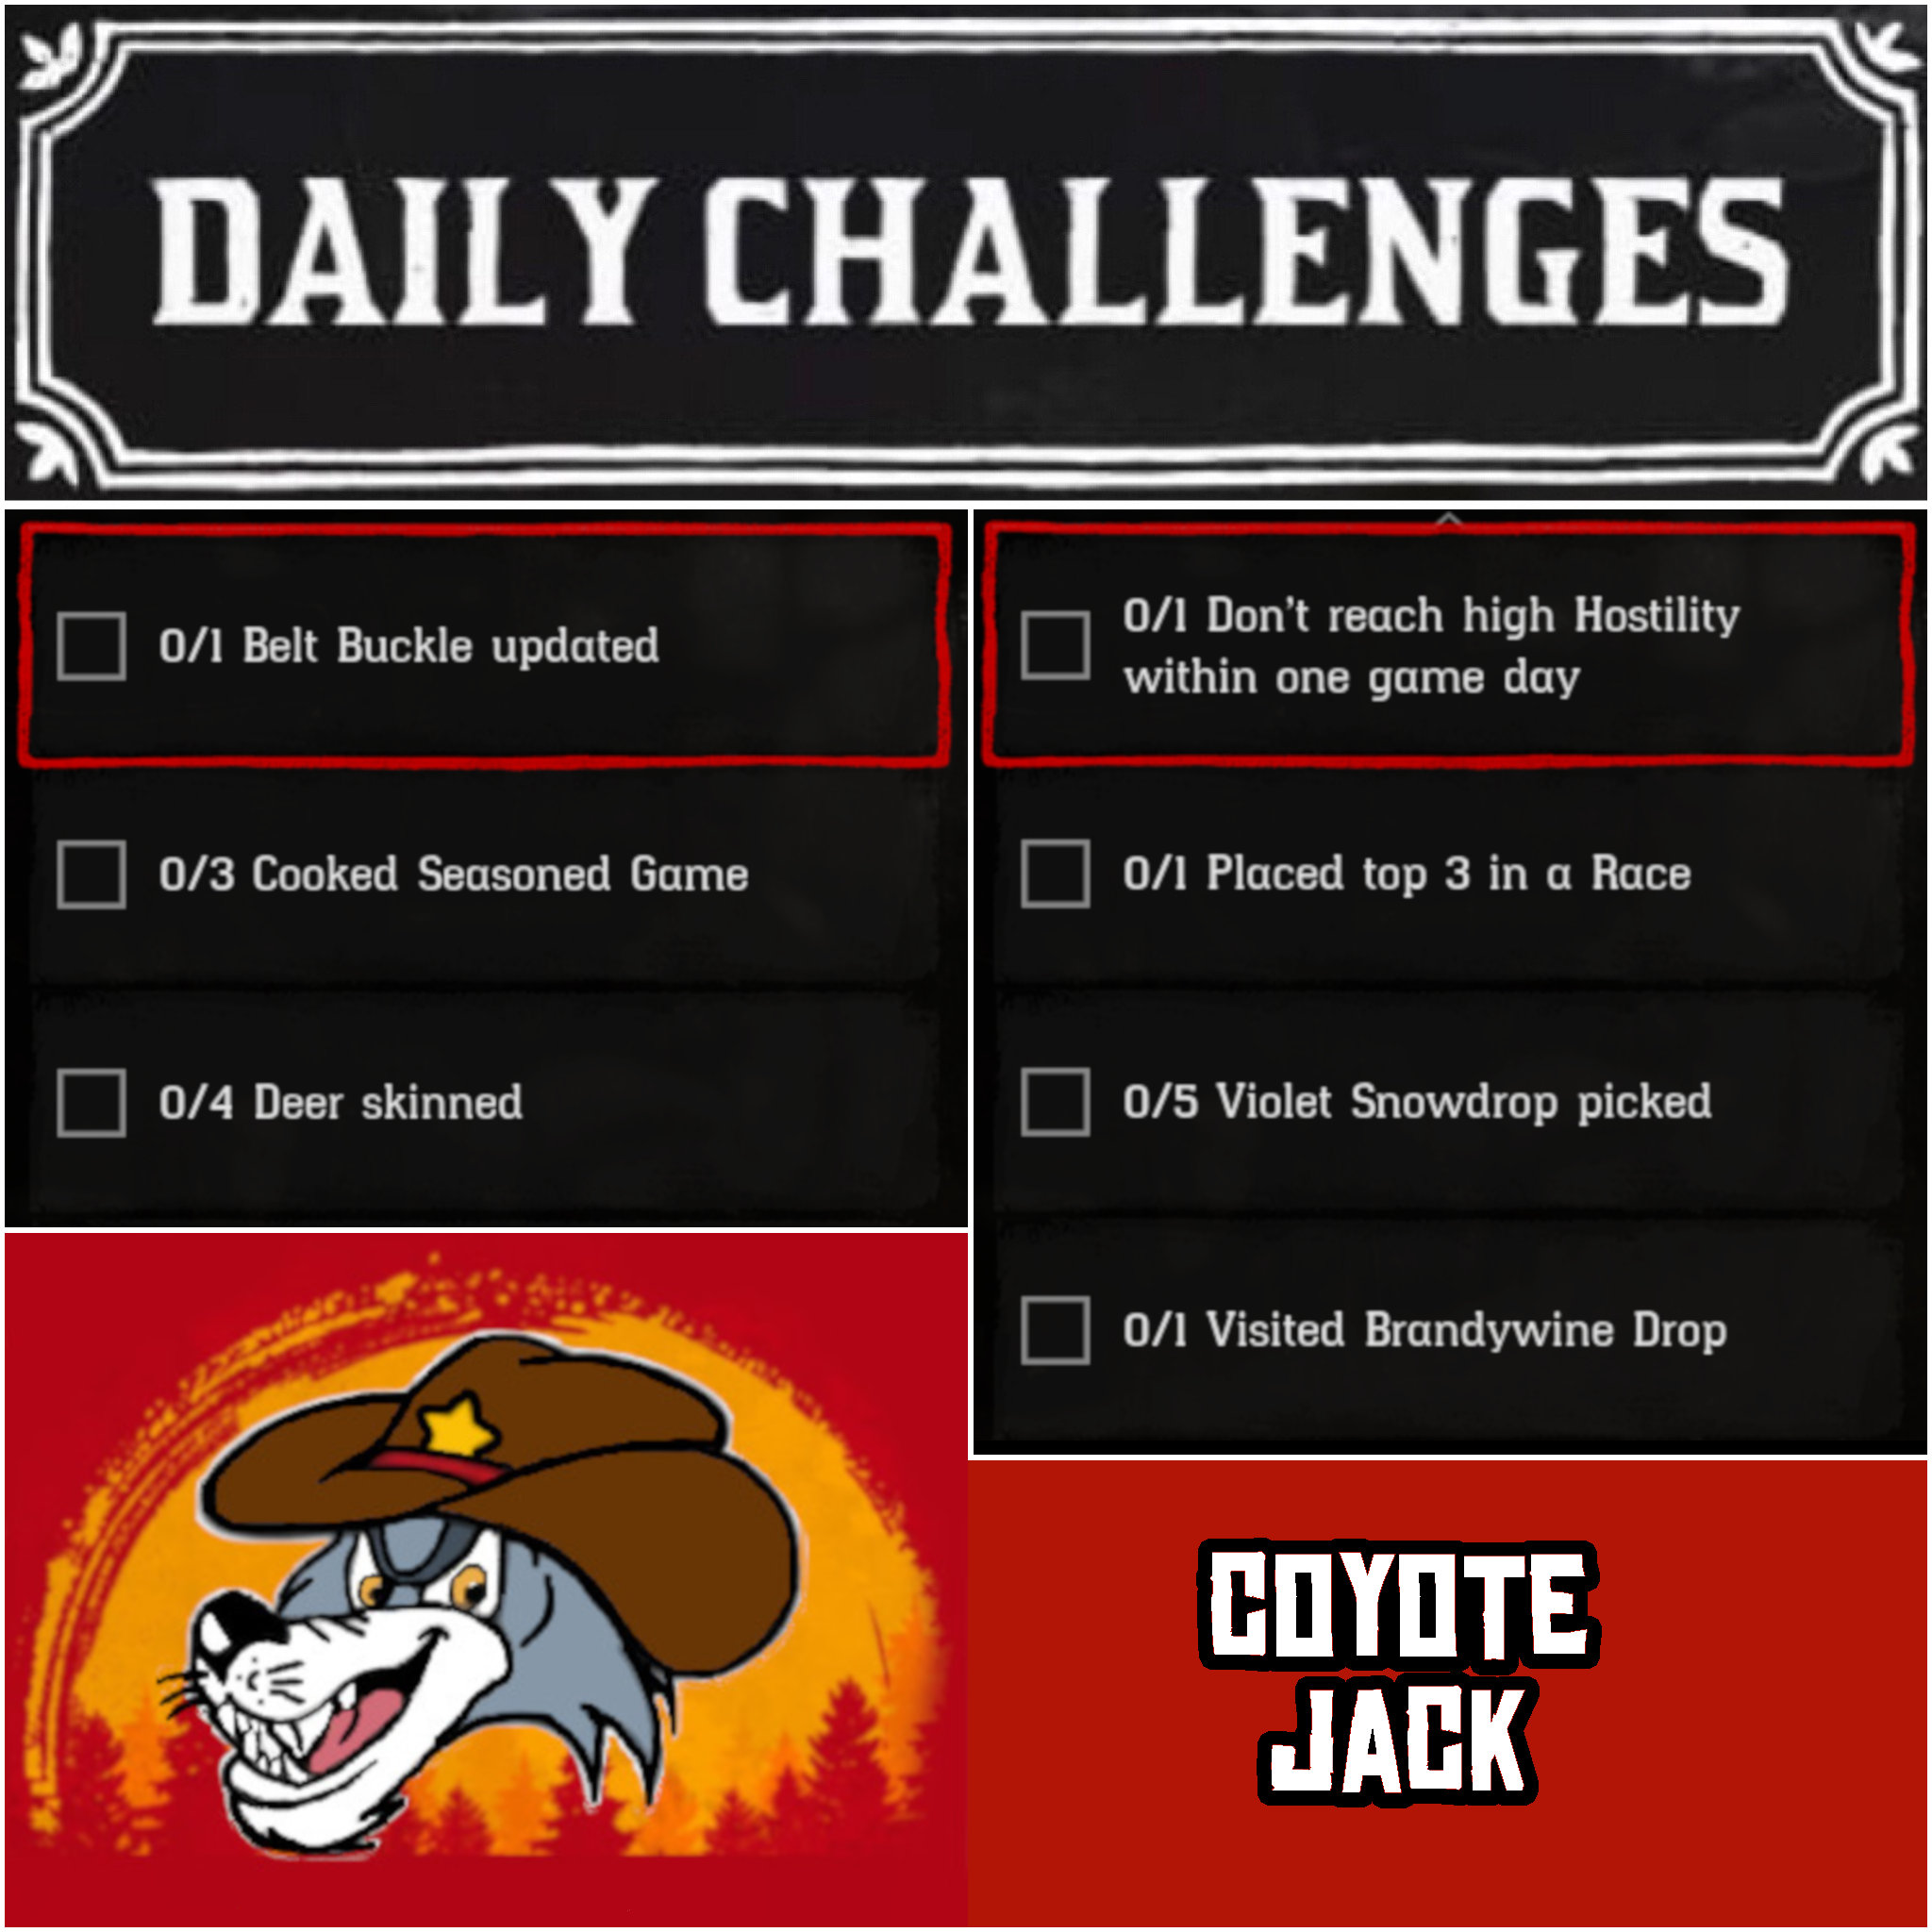 You are currently viewing Thursday 28 January Daily Challenges